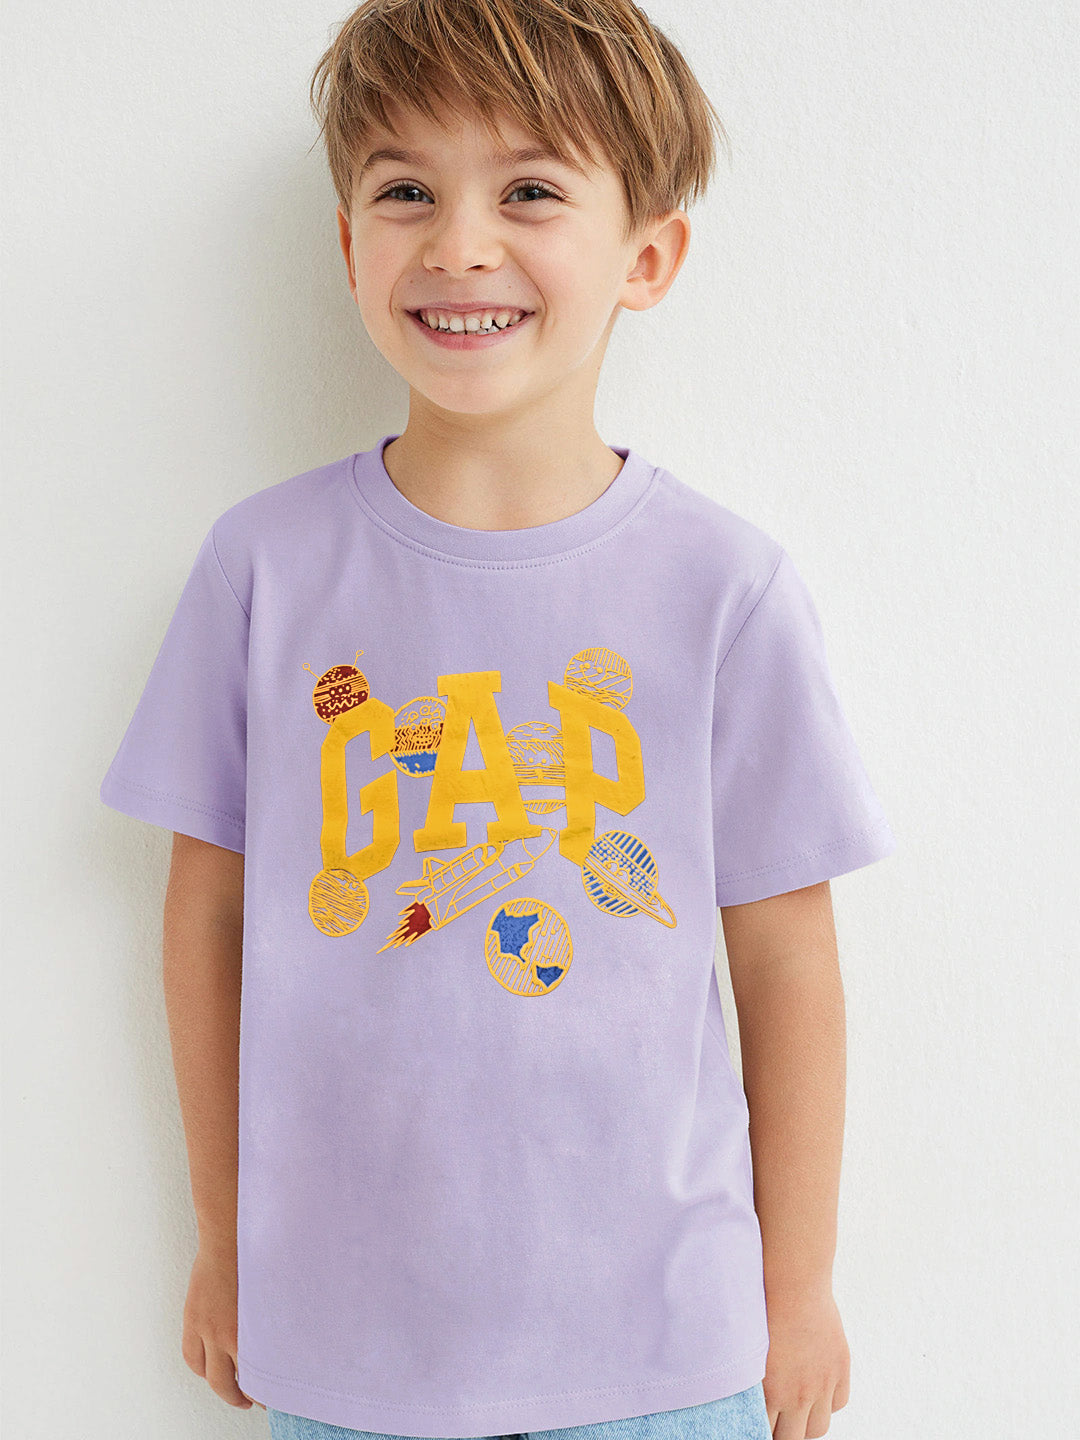 Summer Single Jersey Crew Neck Tee Shirt For Kids-Purple With Print-AN4156